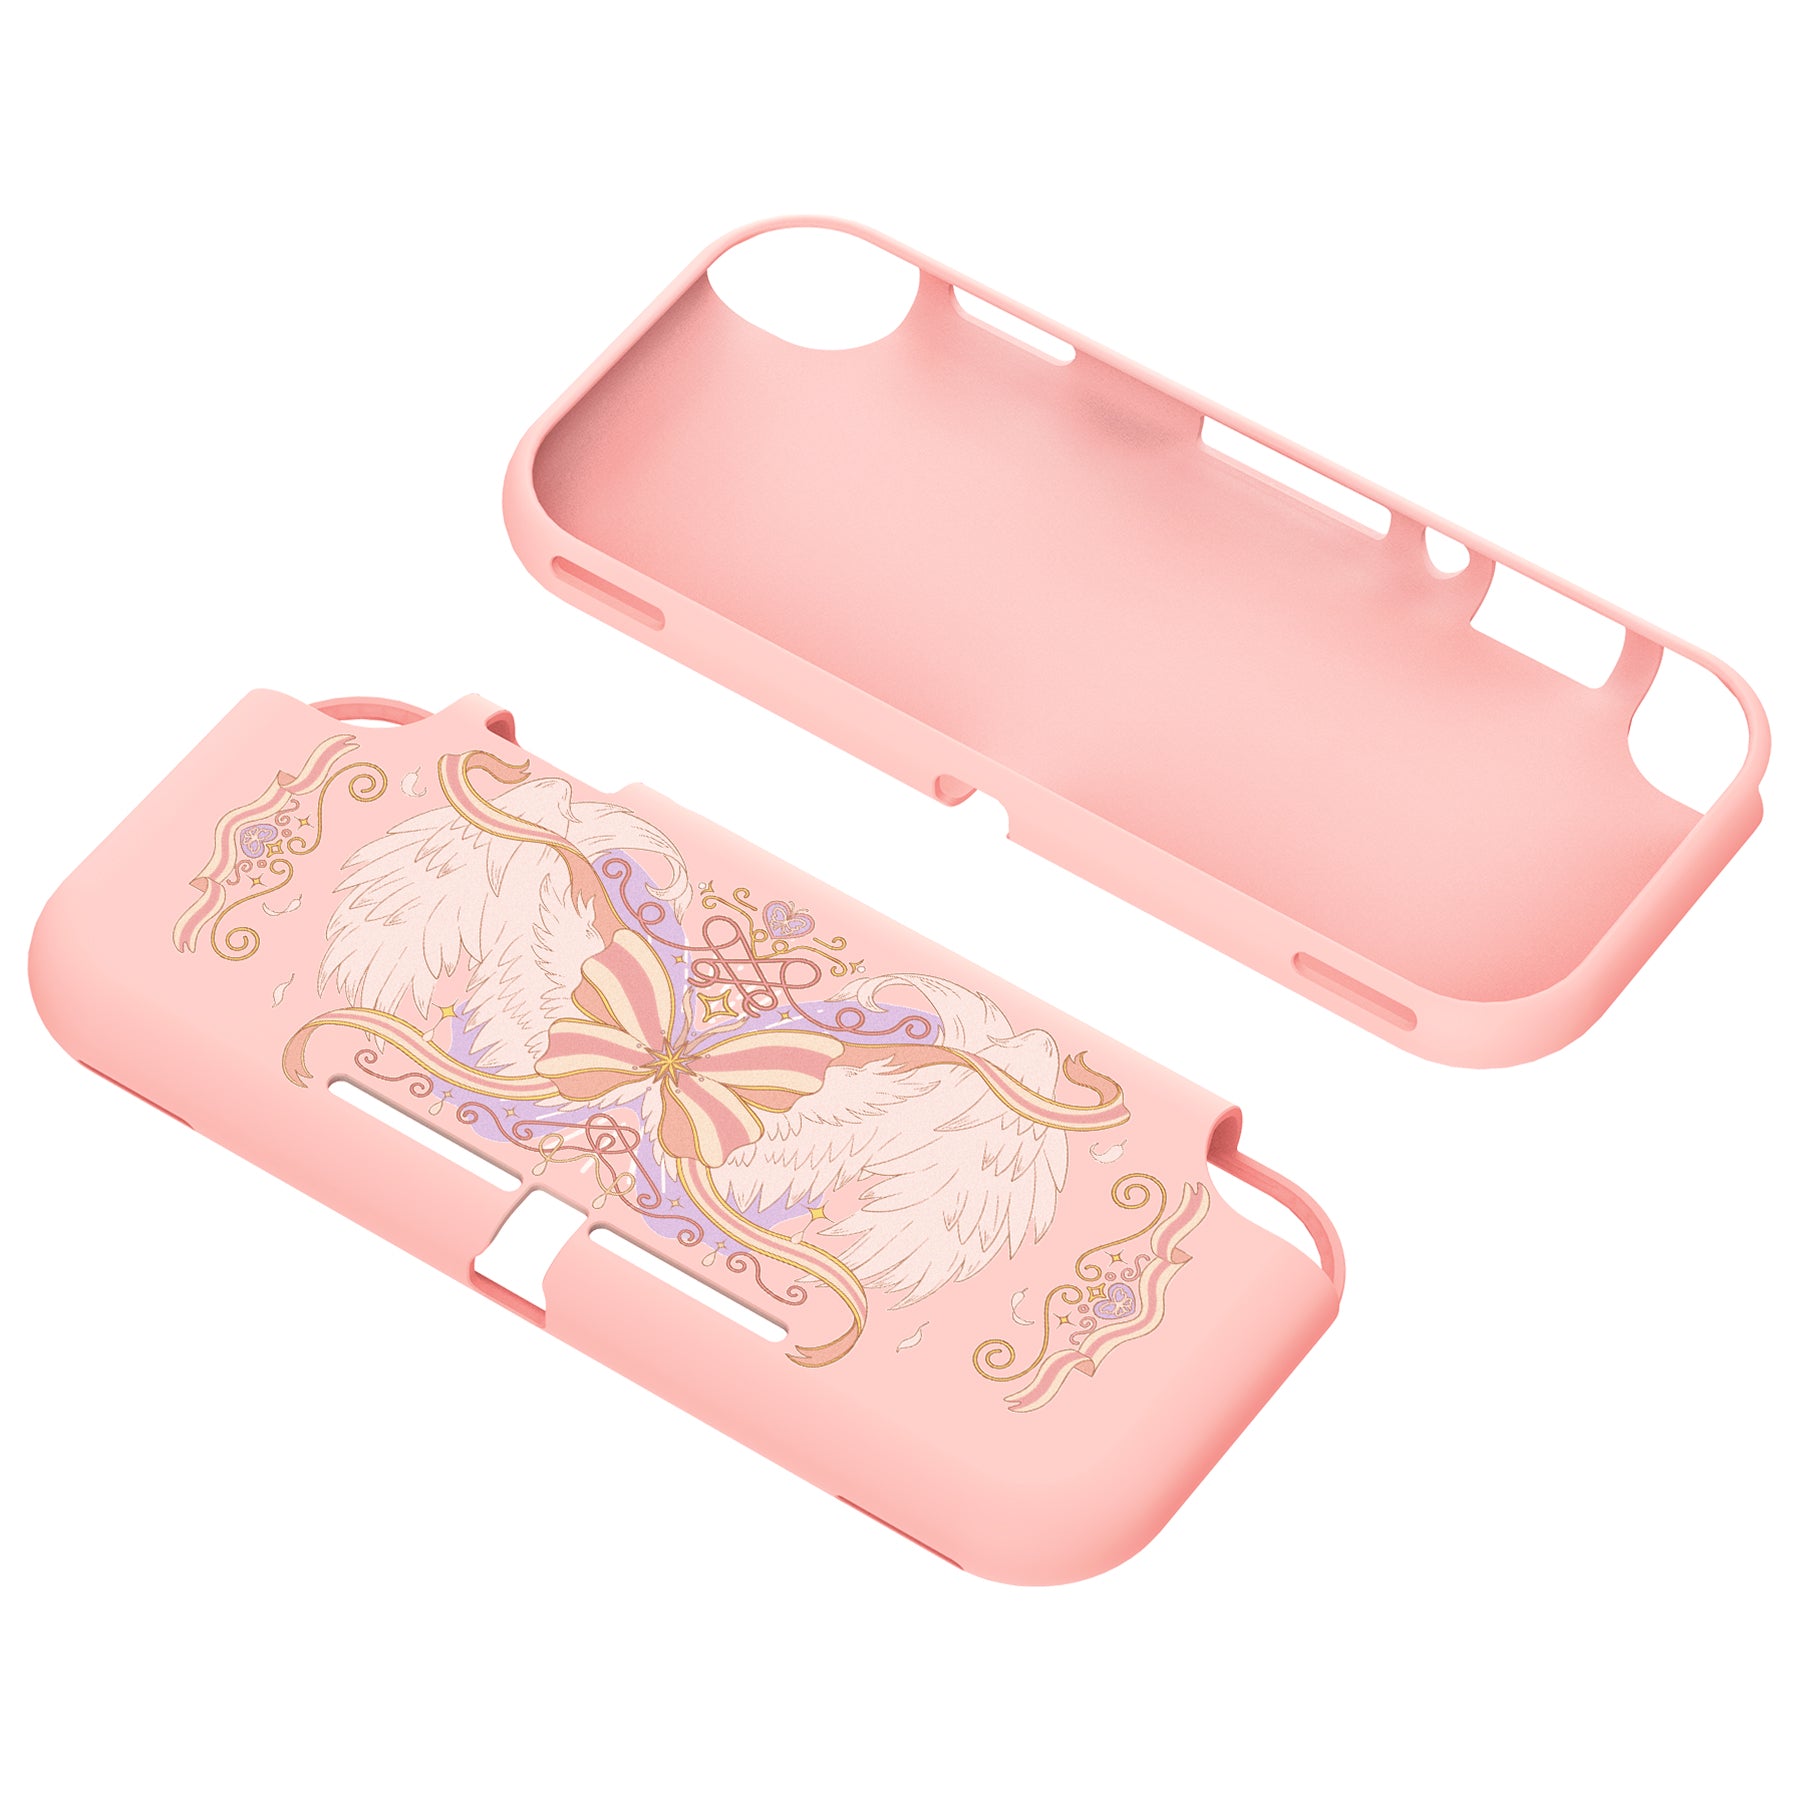 PlayVital Magic Wings Custom Protective Case for NS Switch Lite, Soft TPU Slim Case Cover for NS Switch Lite - LTU6032 PlayVital